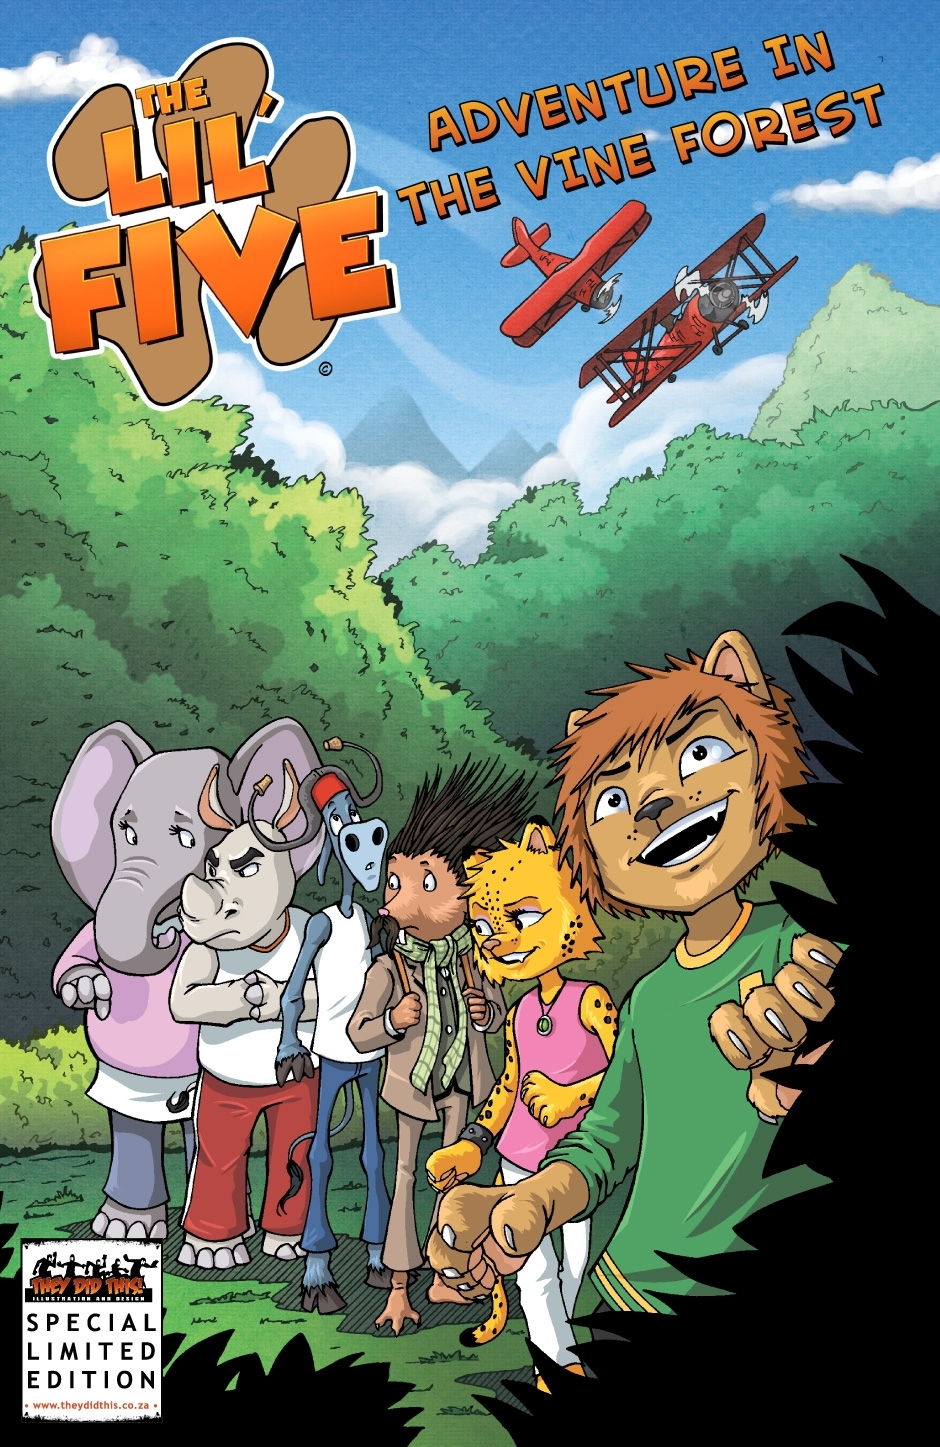 The Lil' Five: Adventure in the Vine Forest